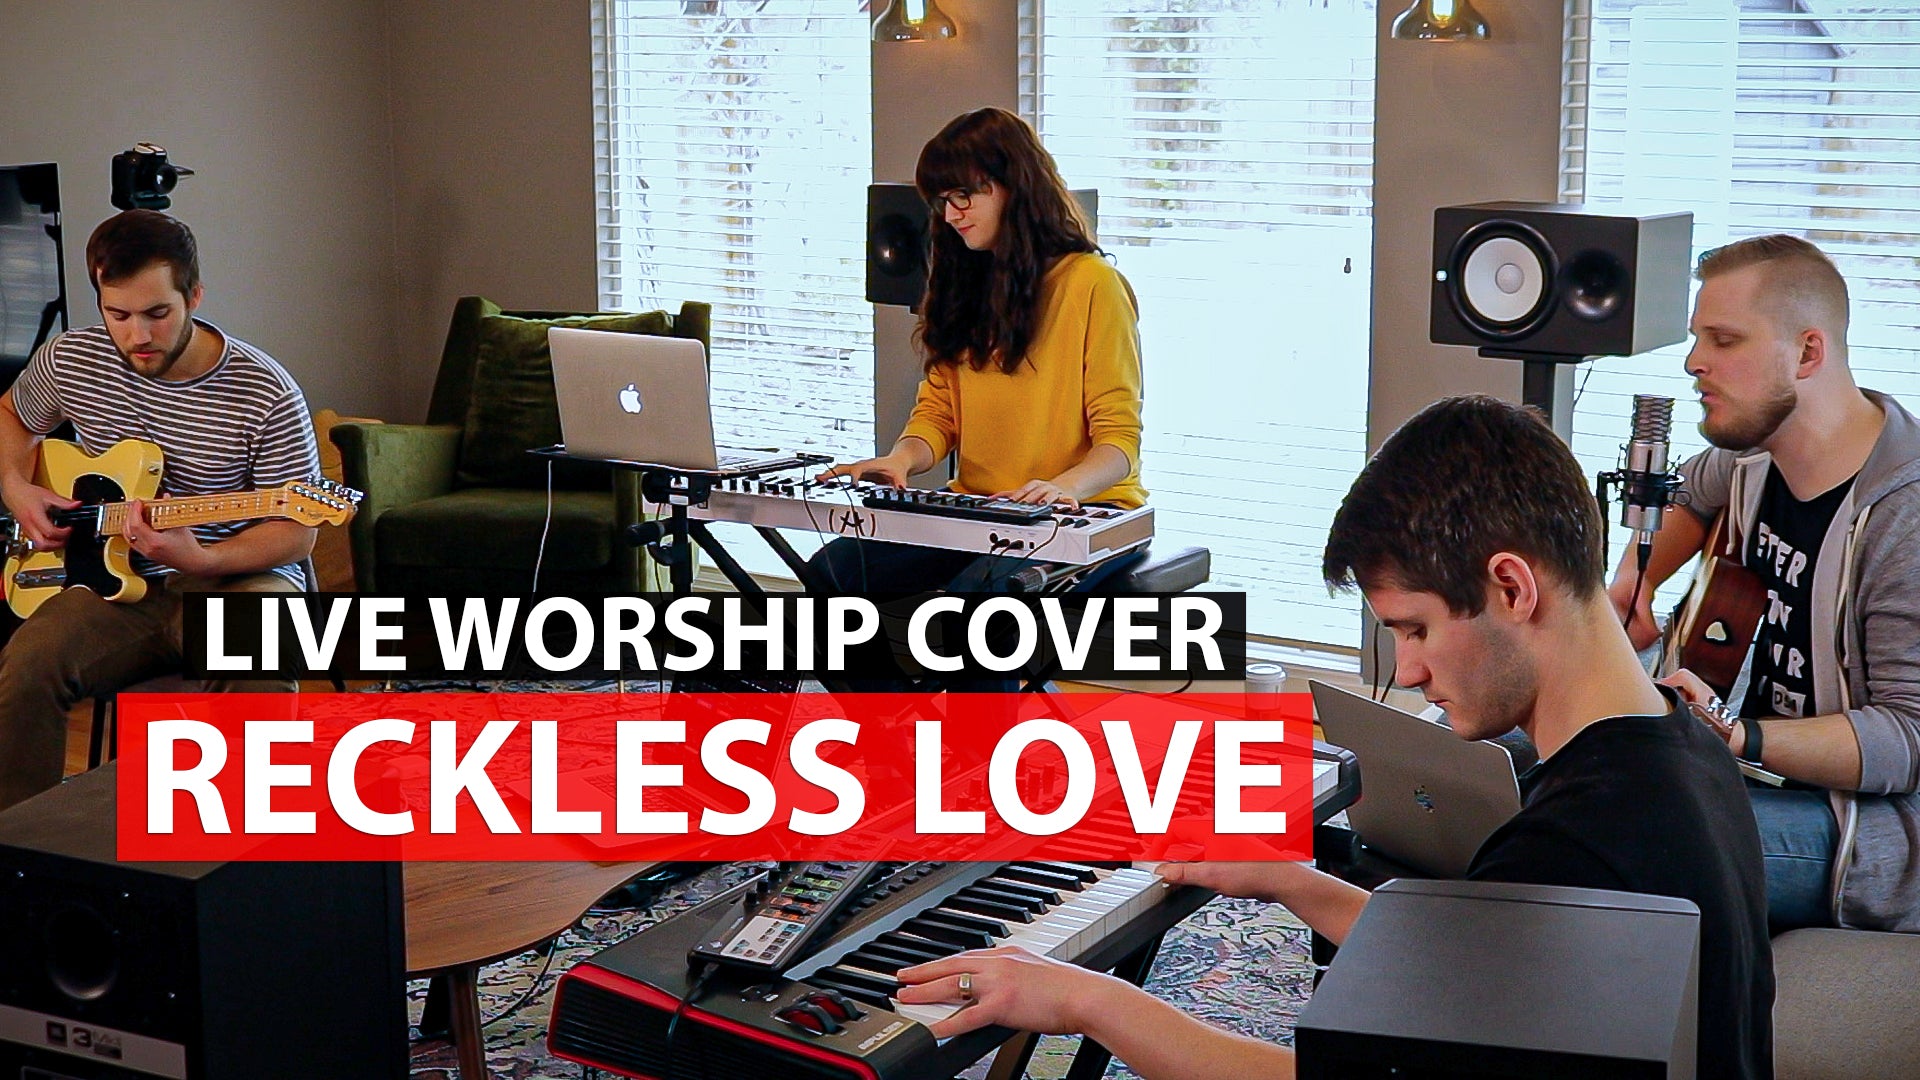 Reckless Love - Live Worship Cover by Team Sunday Sounds